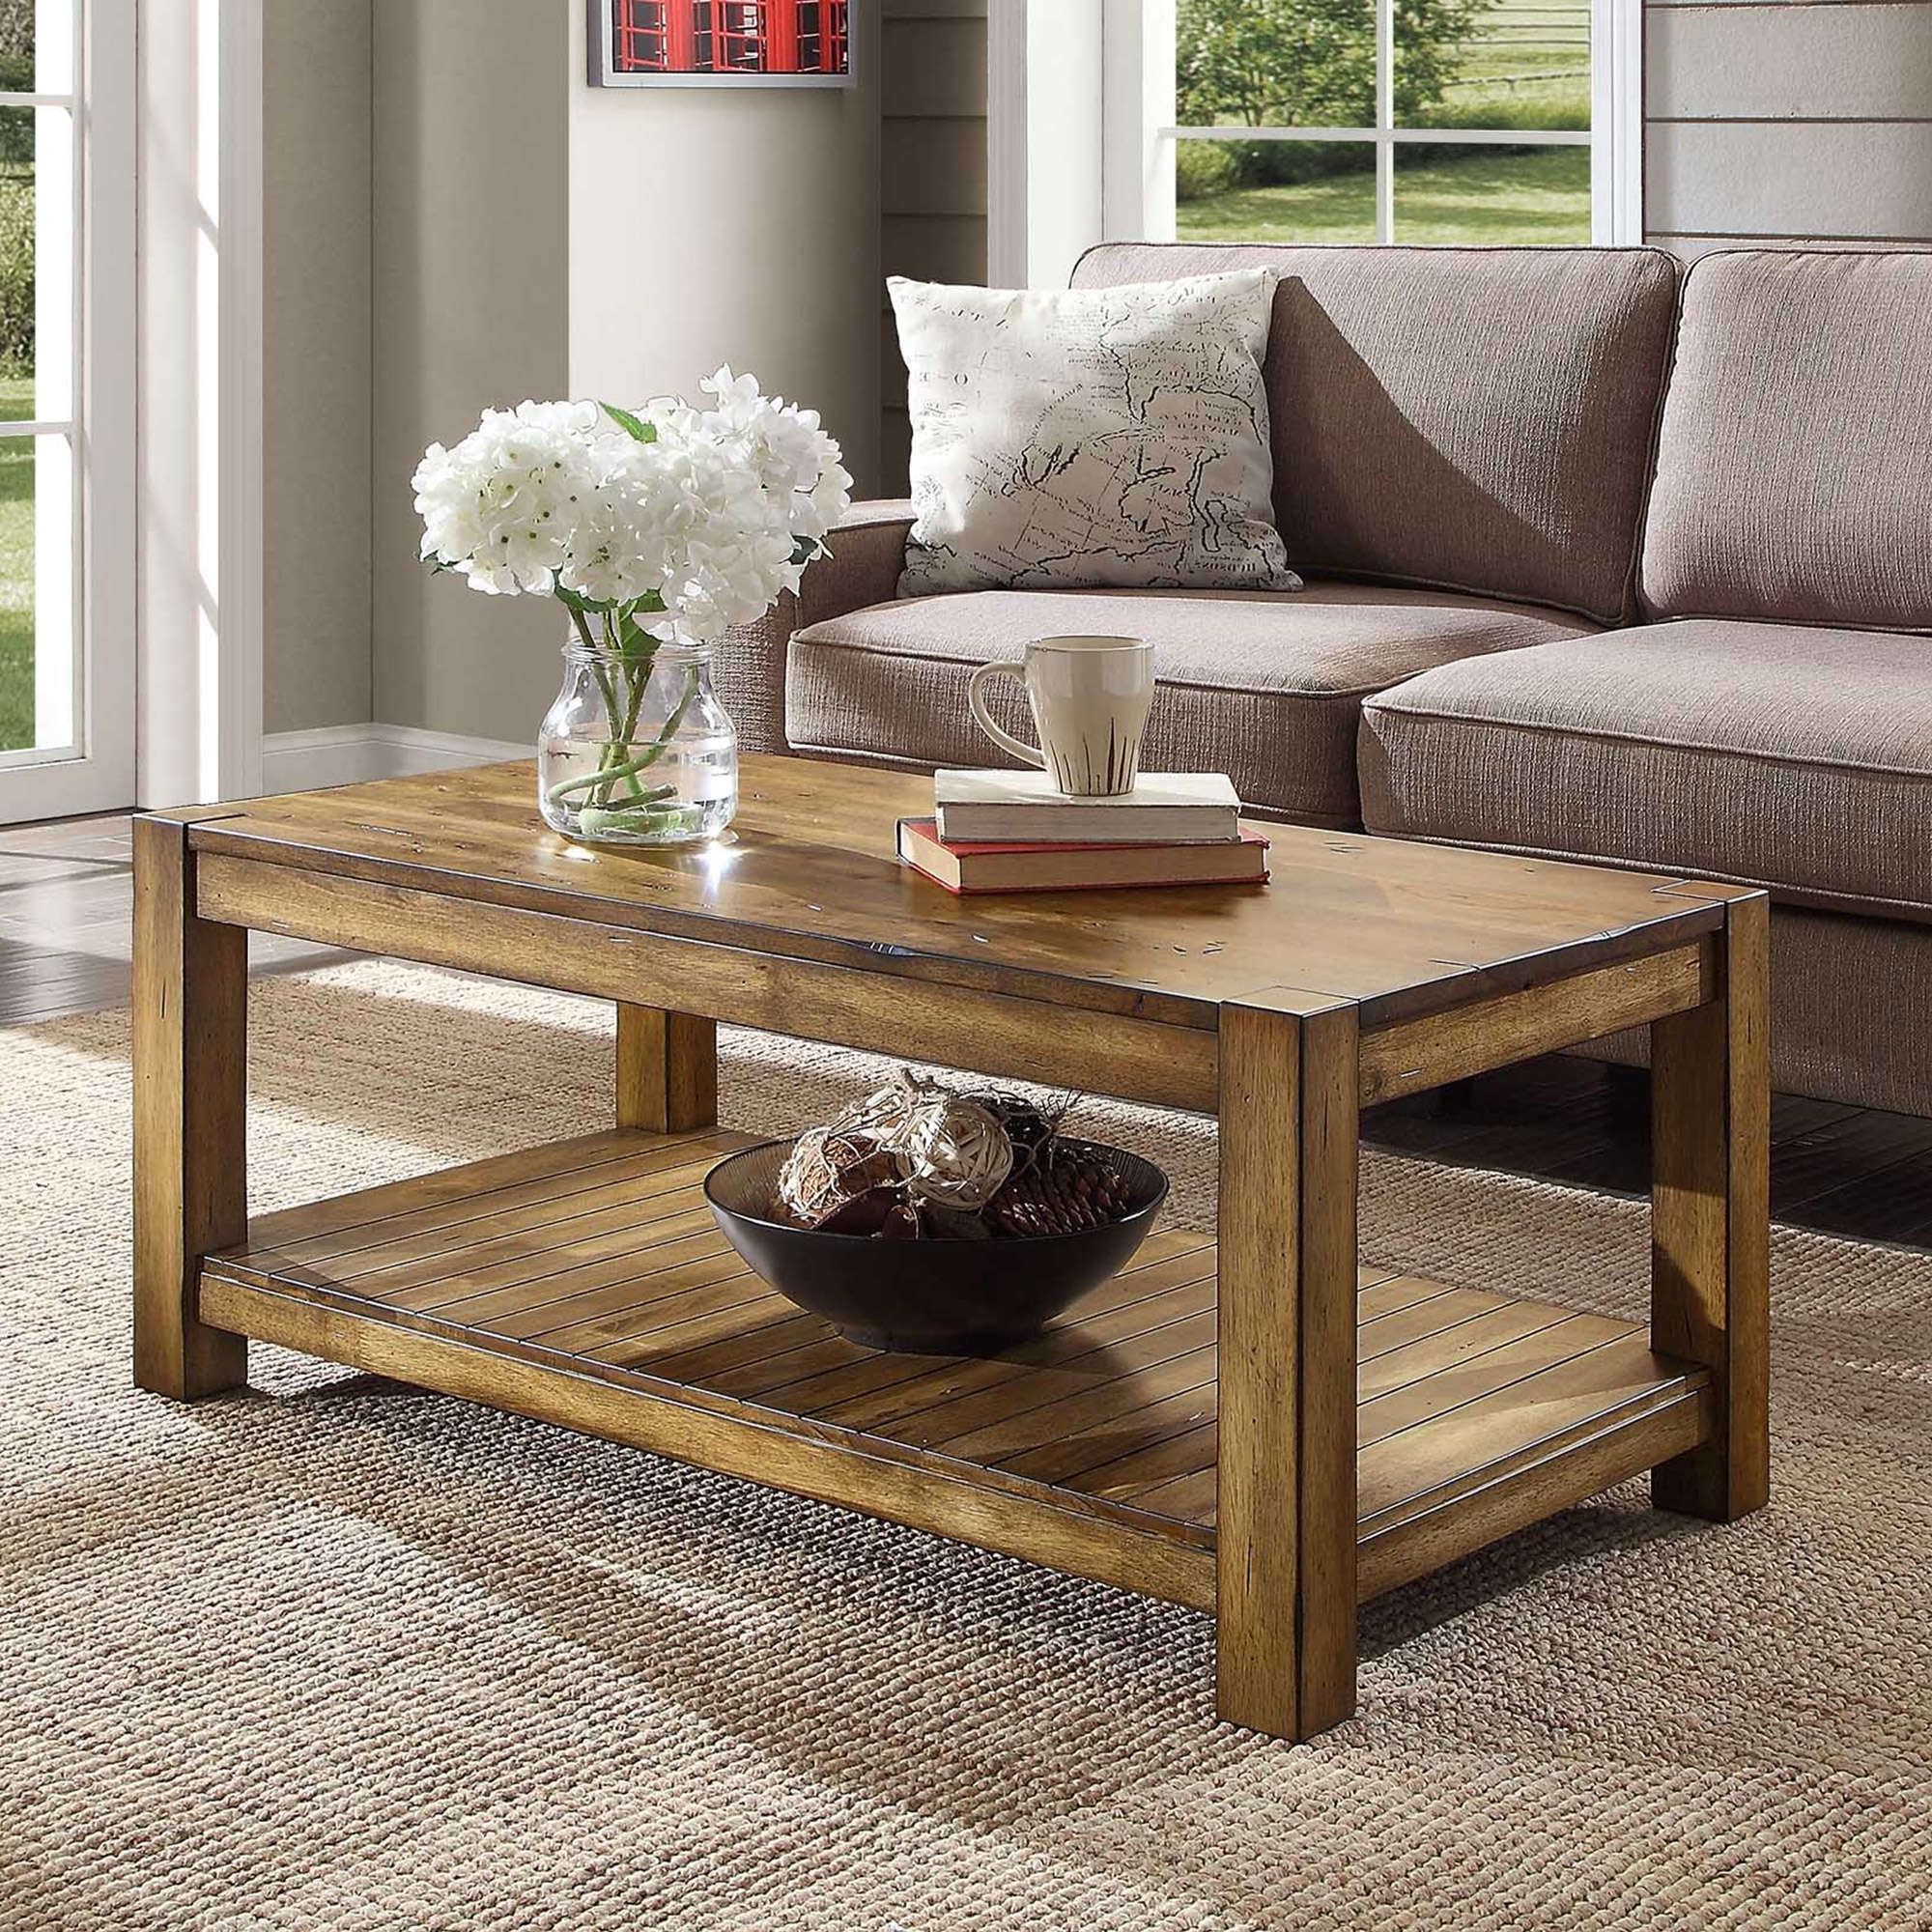 Bryant Solid Wood Coffee Table, Rustic Maple Brown Finish – Walmart Pertaining To Brown Rustic Coffee Tables (View 2 of 20)